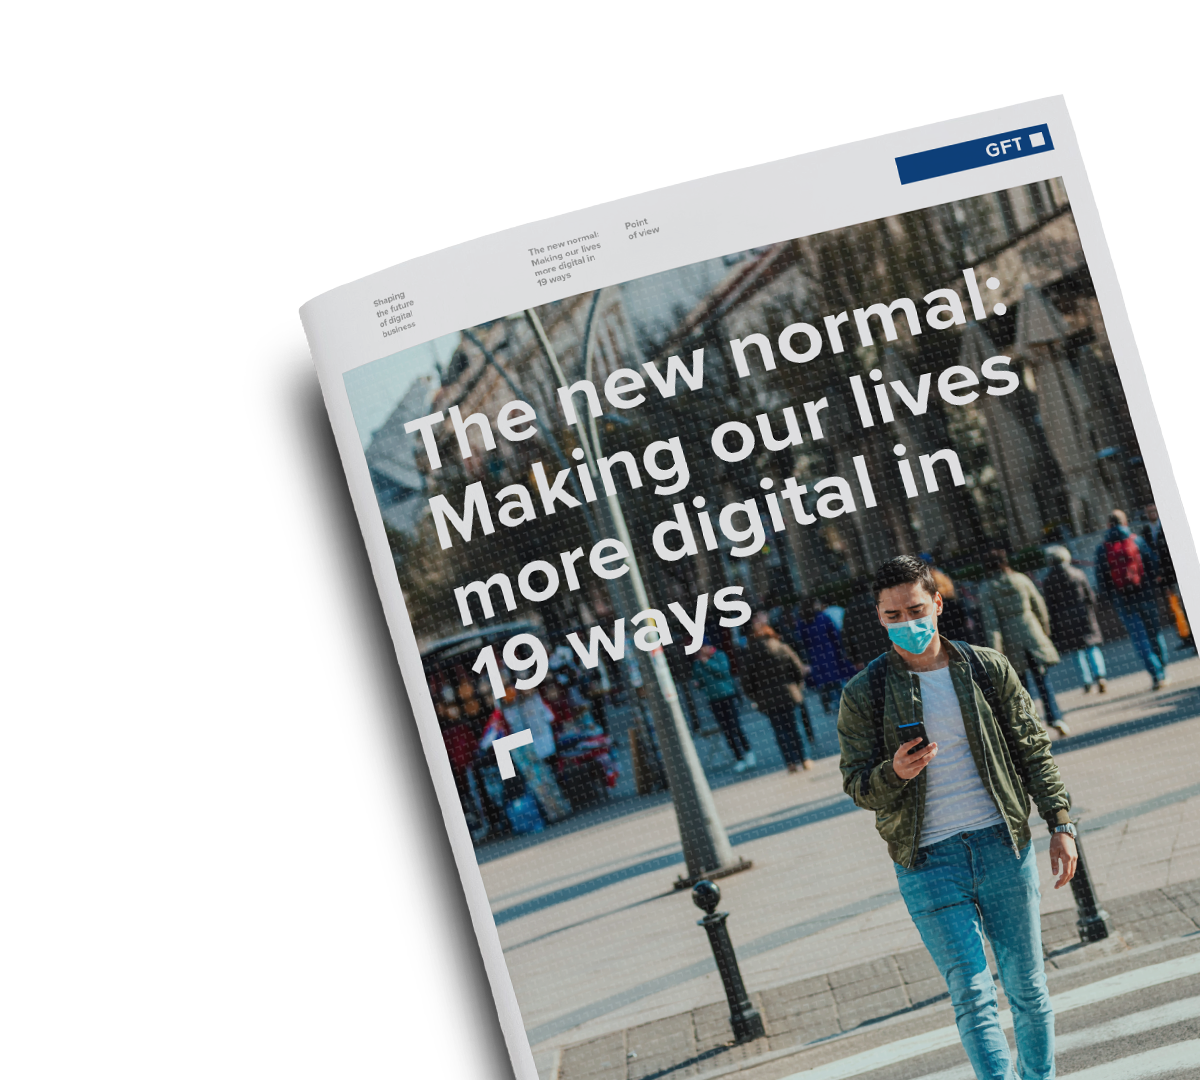 Thought leadership: The new normal: Making our lives more digital in 19 ways